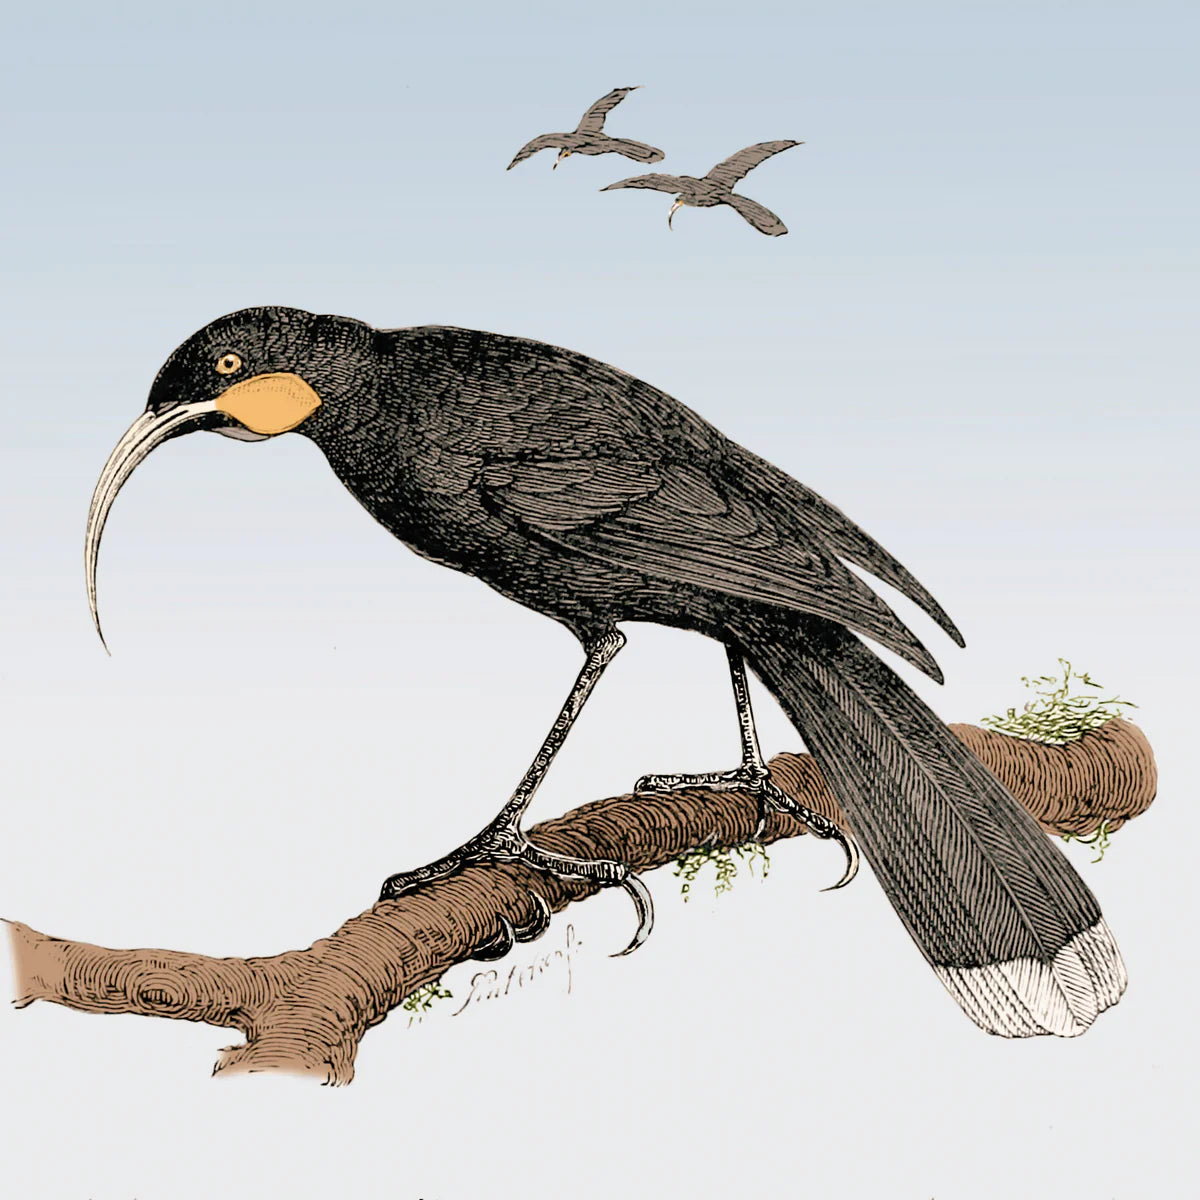 Huia illustration from 1880